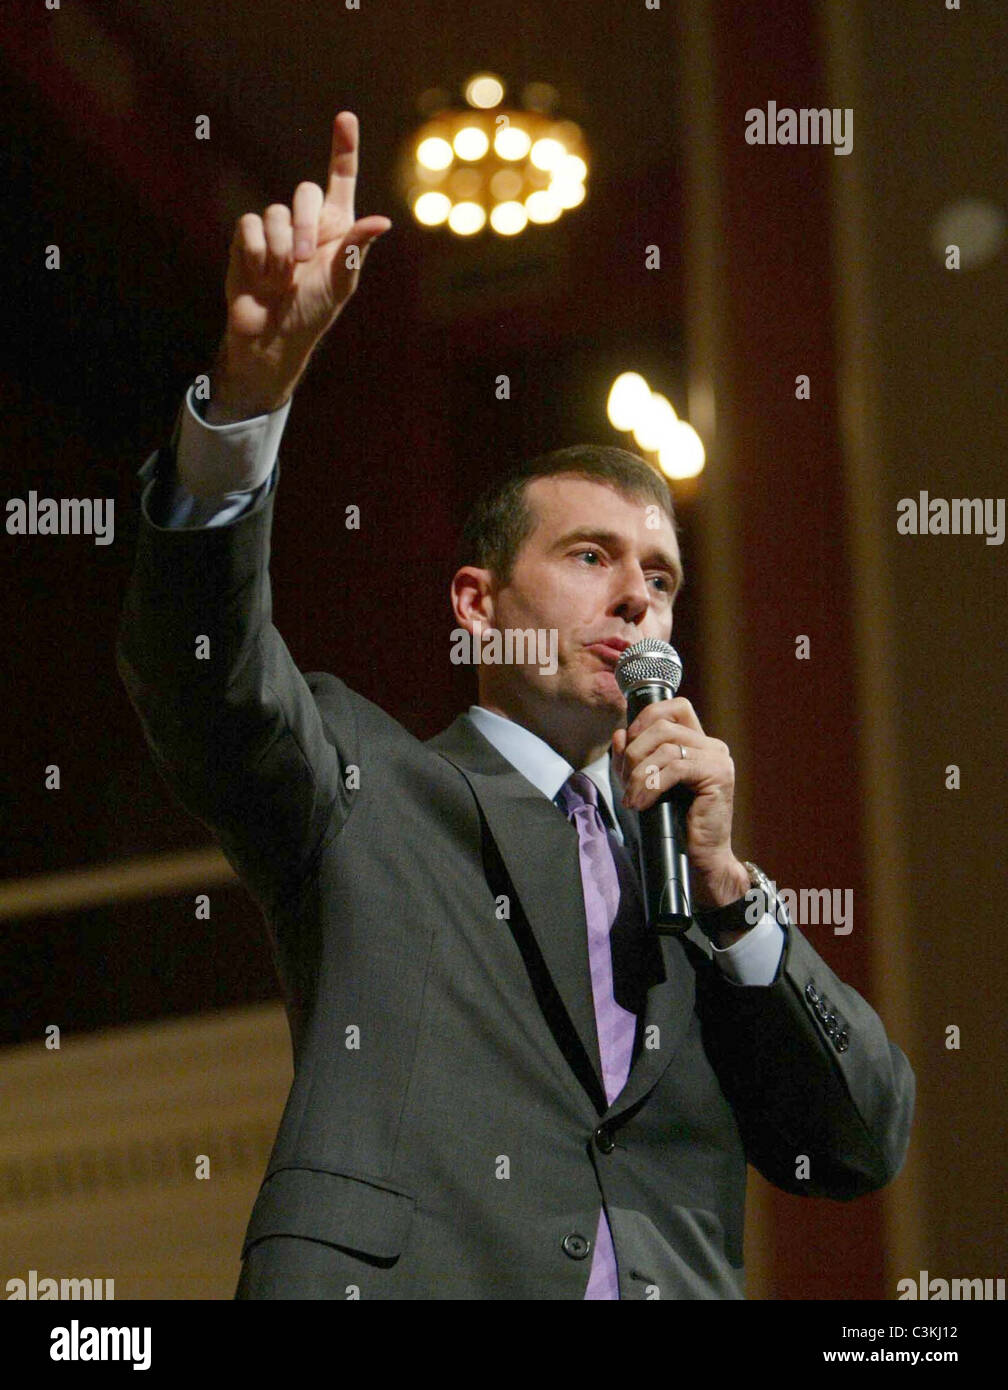 Political Strategist David Plouffe best known as the chief campaign manager for Barack Obama's 2008 presidential campaign Stock Photo